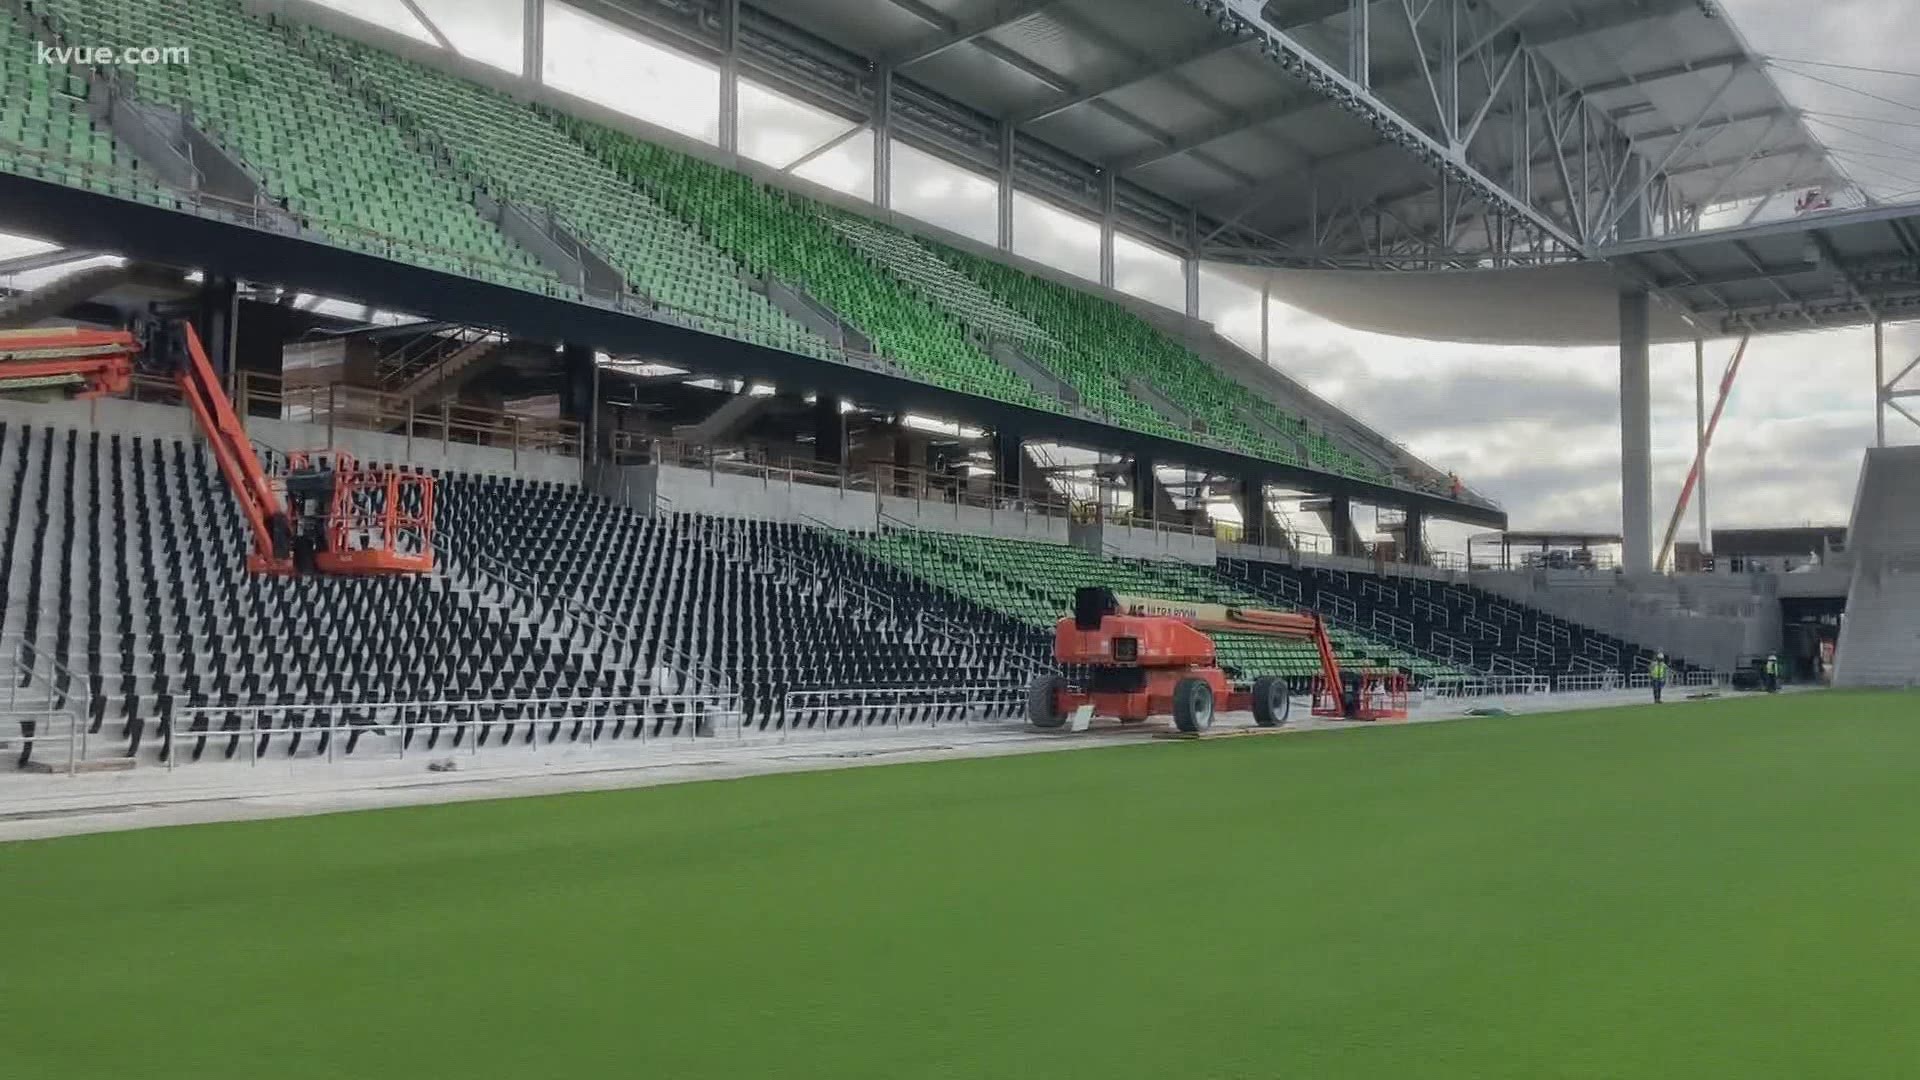 We know its location, its size, even what Austin FC's stadium will look like. But we don't yet know what it will be called.